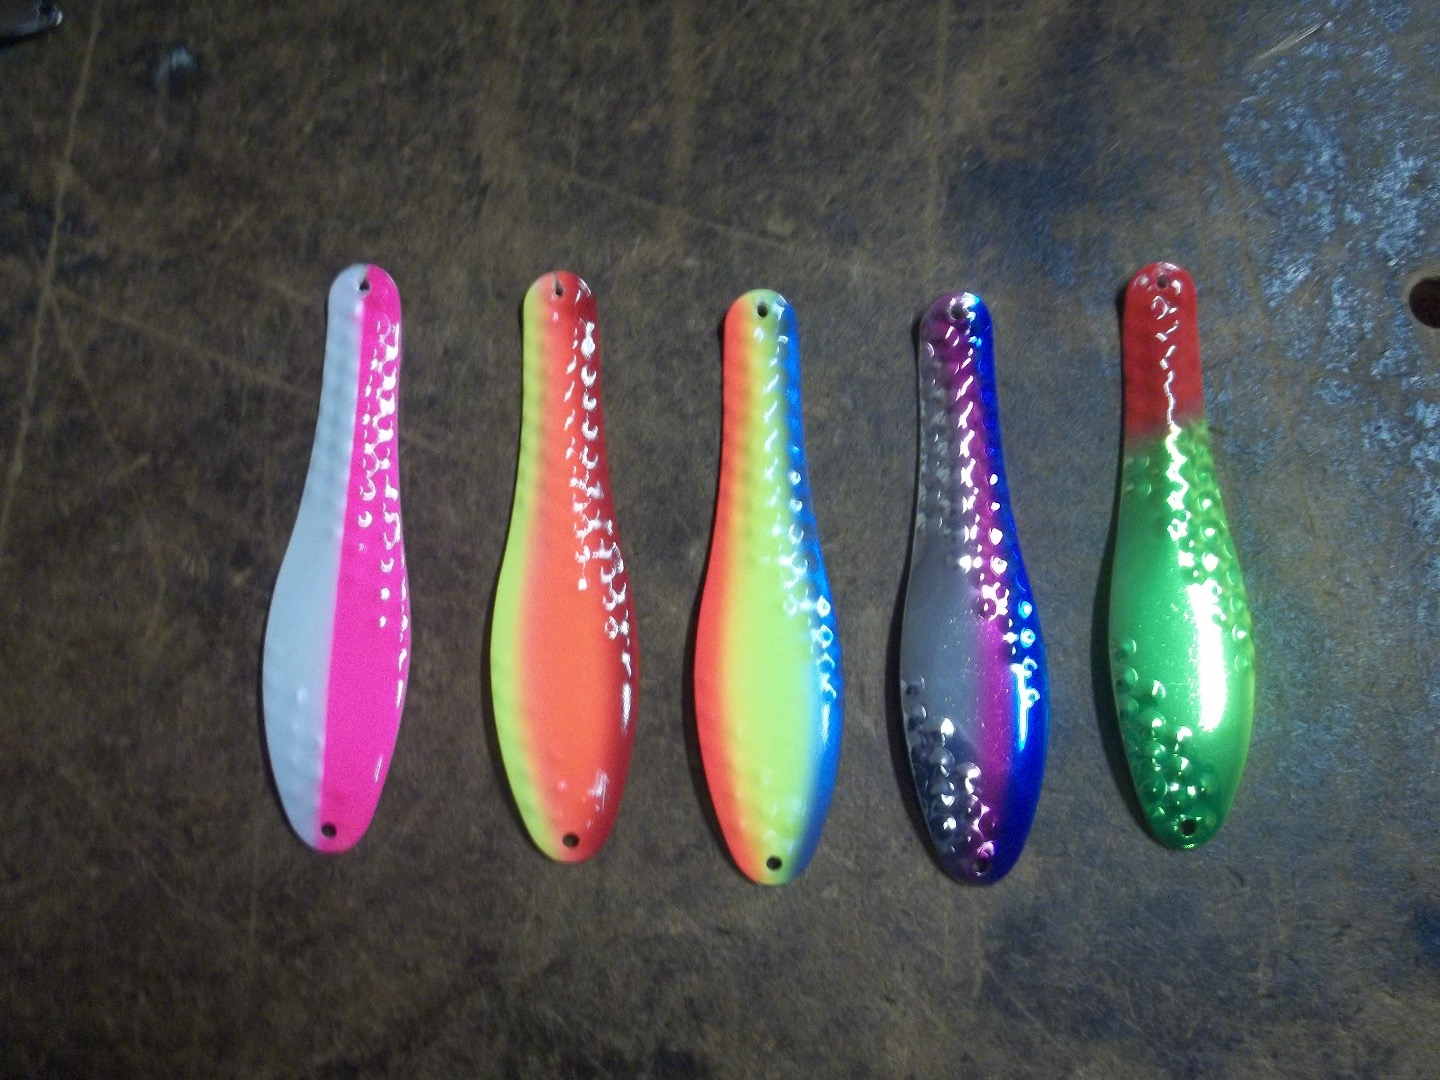 New Optimizer spoon colors for trout!